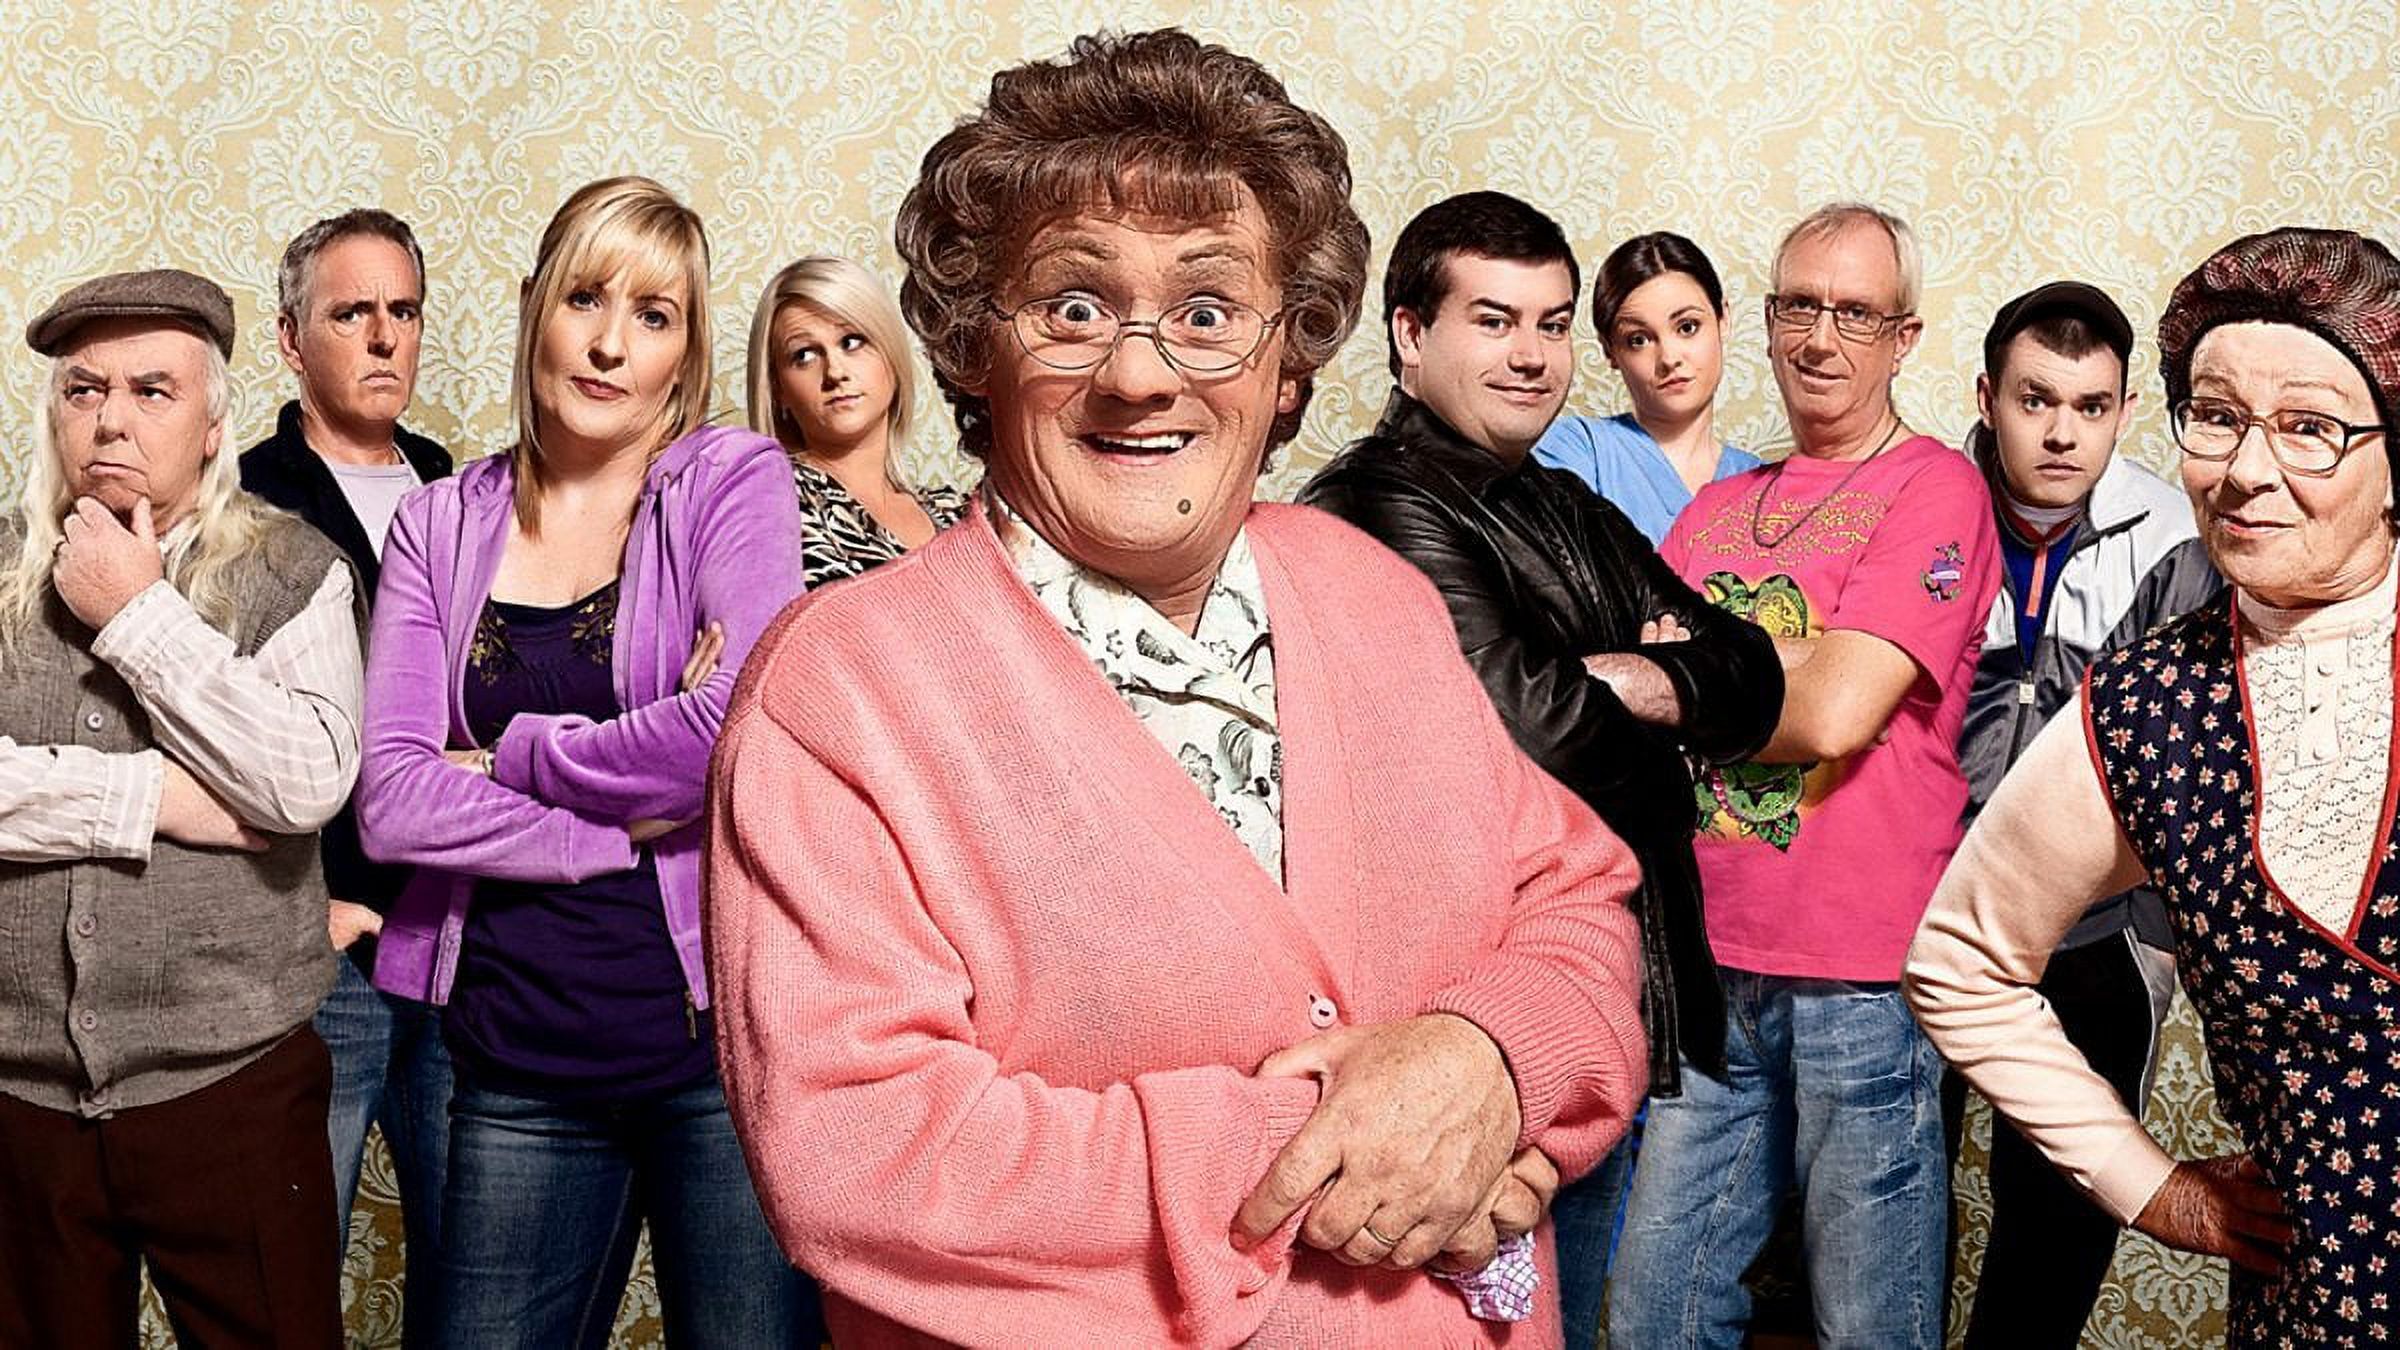 Mrs. Brown's Boys: Complete Series (DVD), Universal Studios, Comedy - image 3 of 4